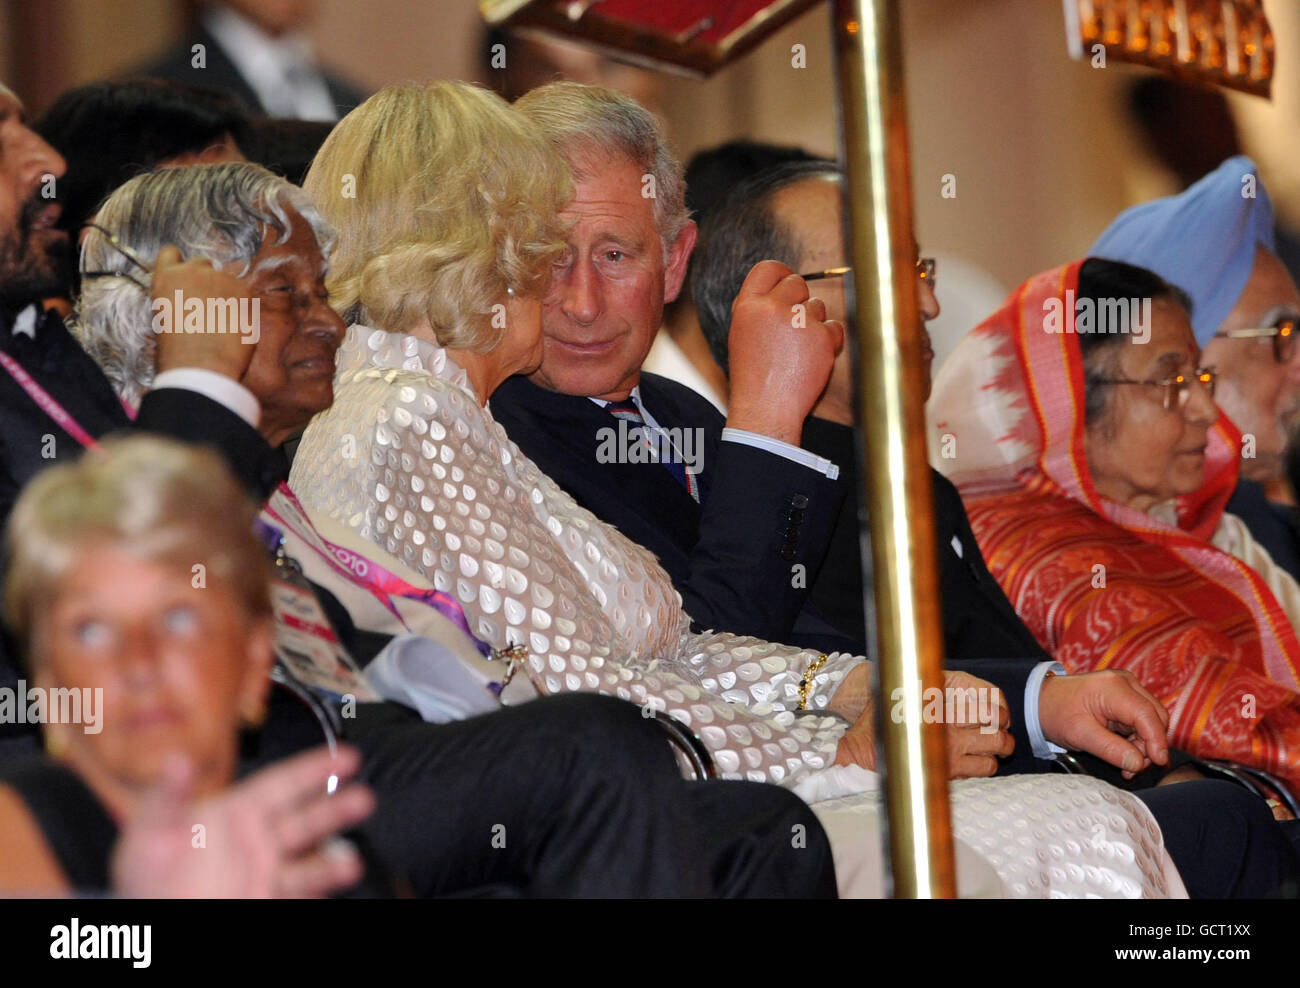 the-prince-of-wales-and-the-duchess-of-cornwall-attend-the-opening-GCT1XX.jpg